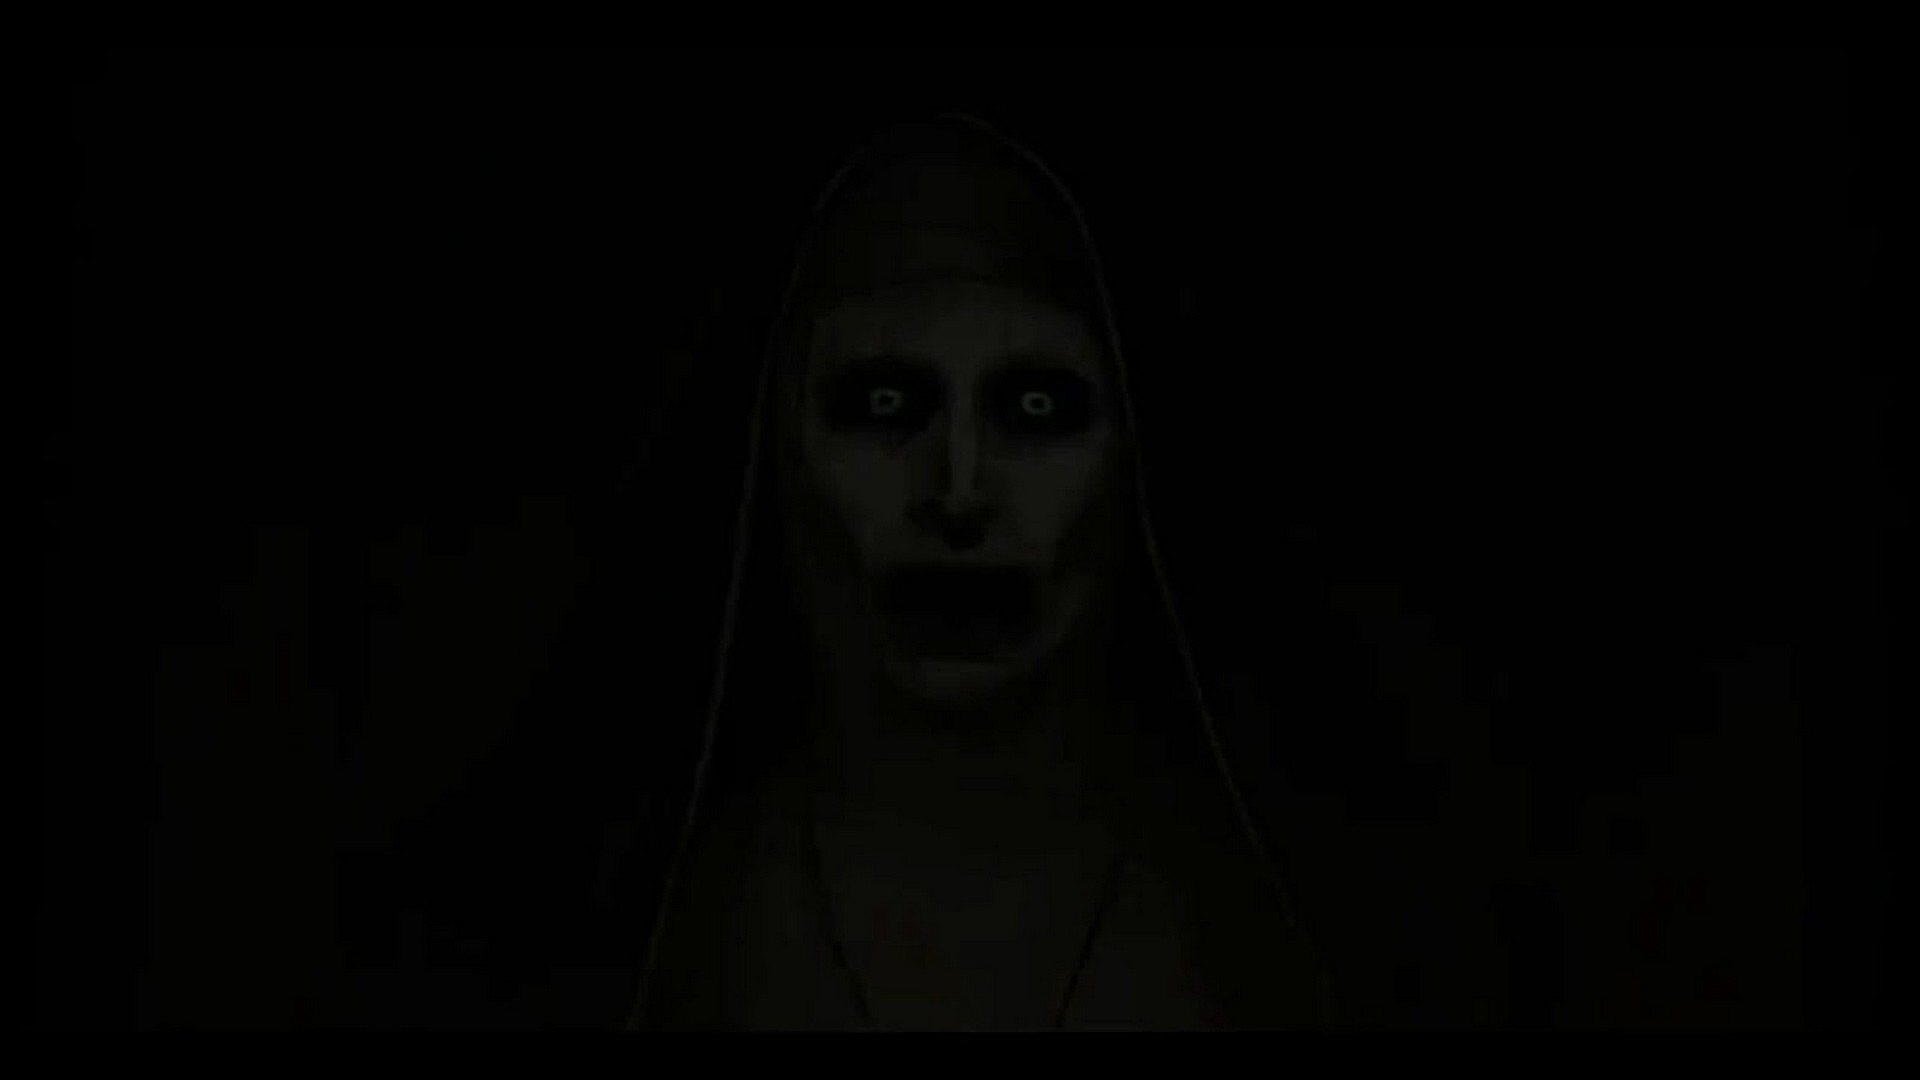 The Nun Valak HD Wallpaper with image resolution 1920x1080 pixel. You can make this wallpaper for your Desktop Computer Backgrounds, Mac Wallpapers, Android Lock screen or iPhone Screensavers